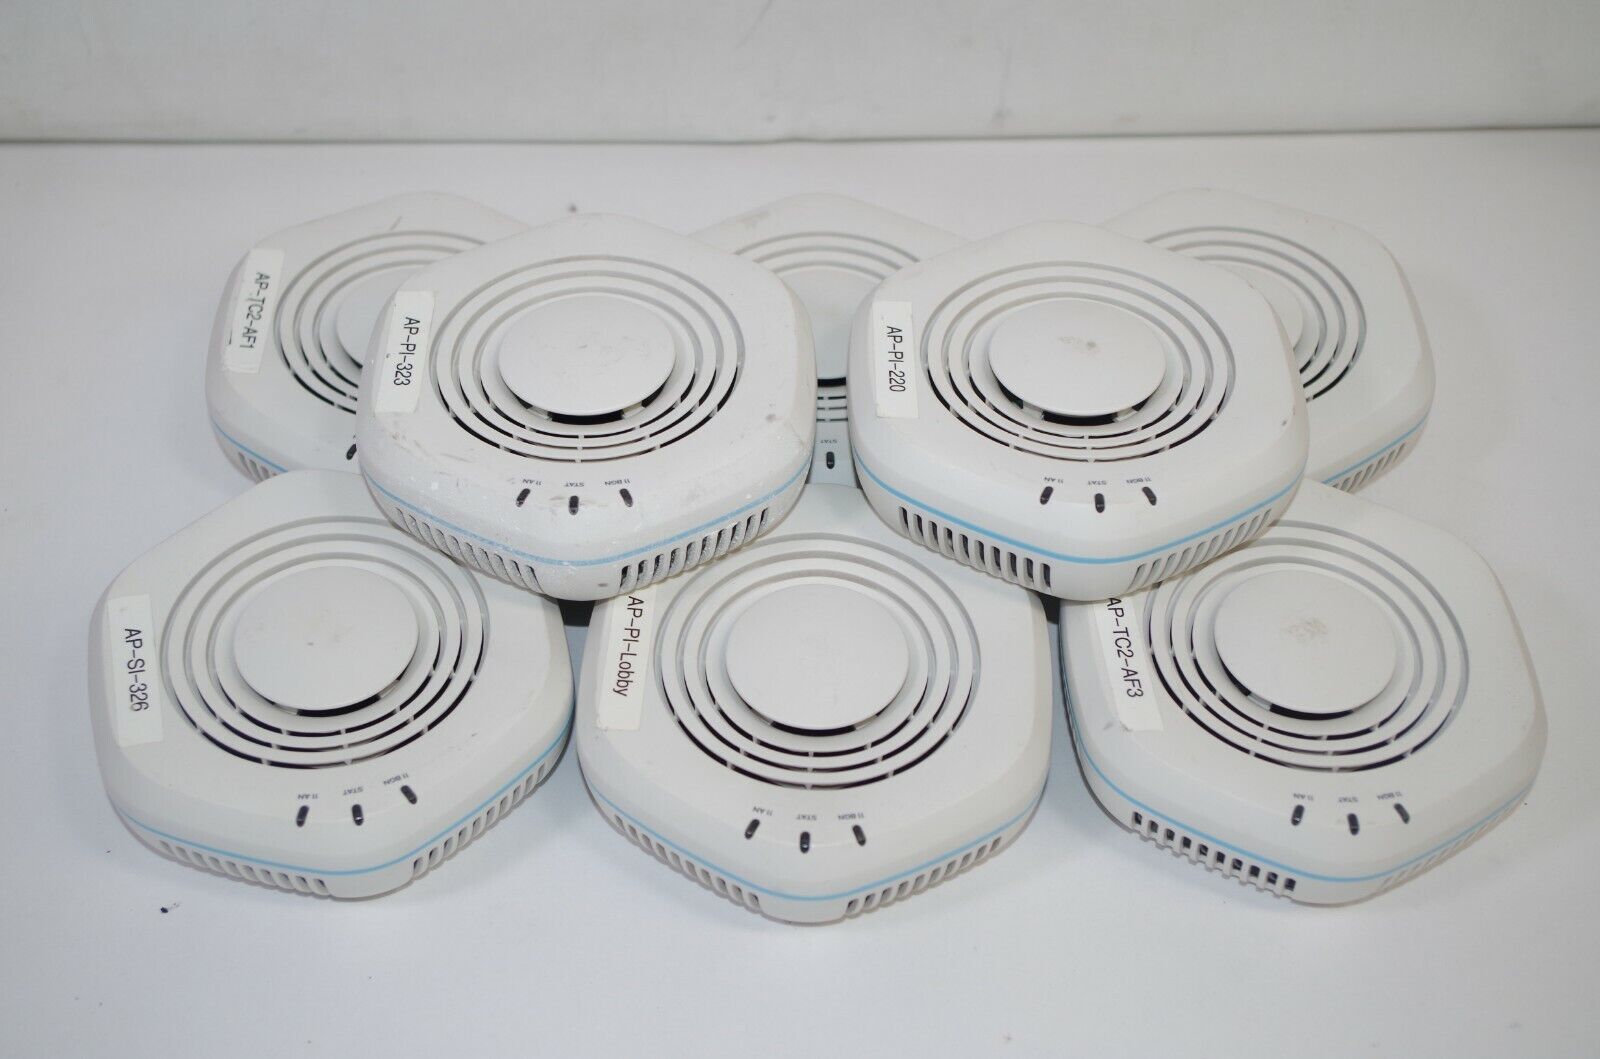 Lot of 11 Juniper WLA532-US Wireless LAN Access Points Tested and working